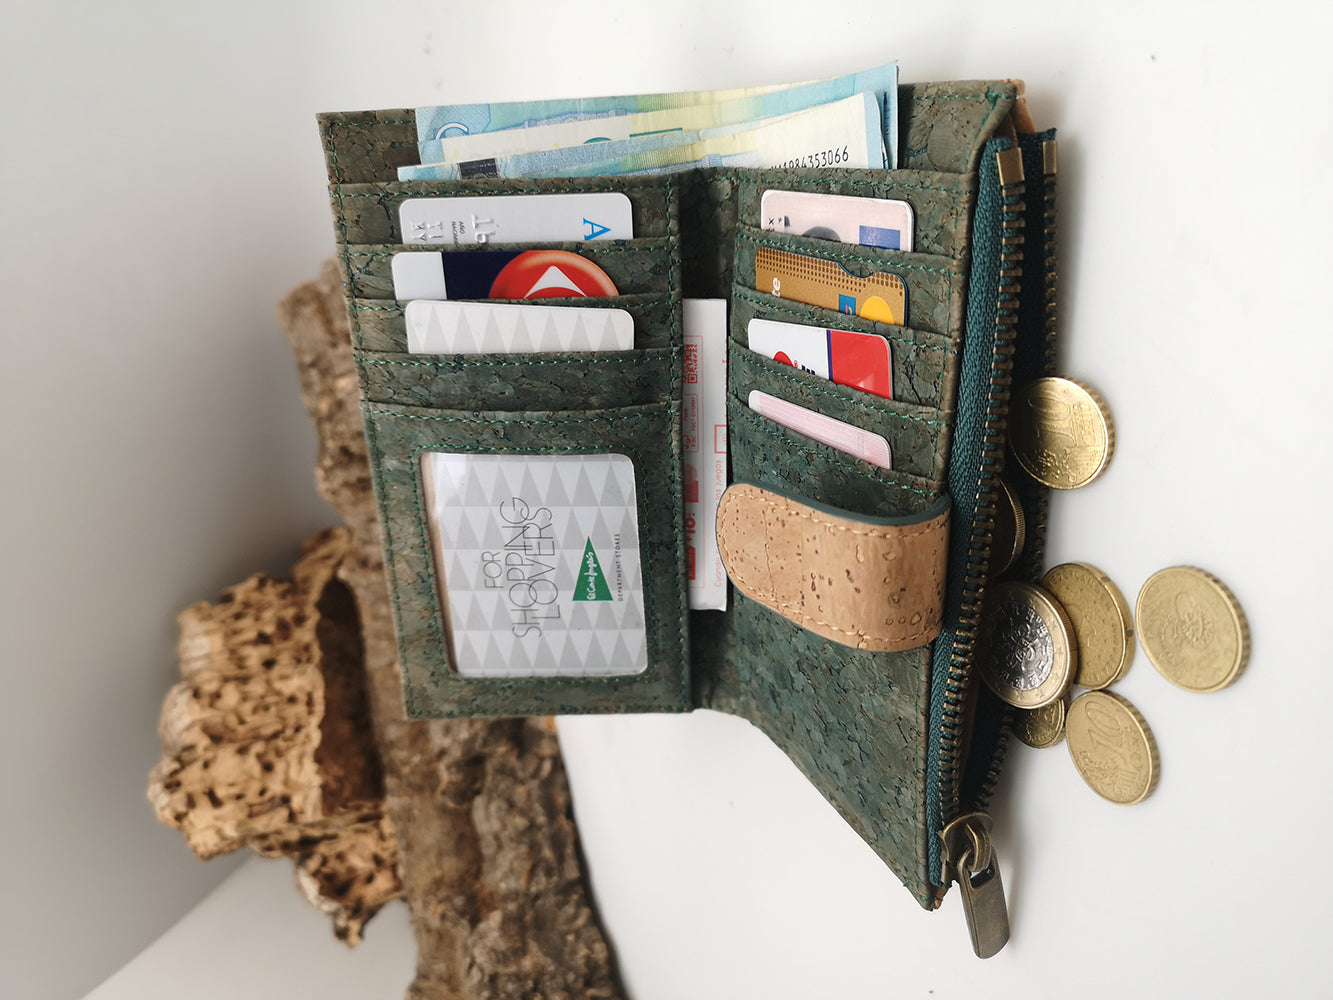 Cork wallet with zipper The Starry Night